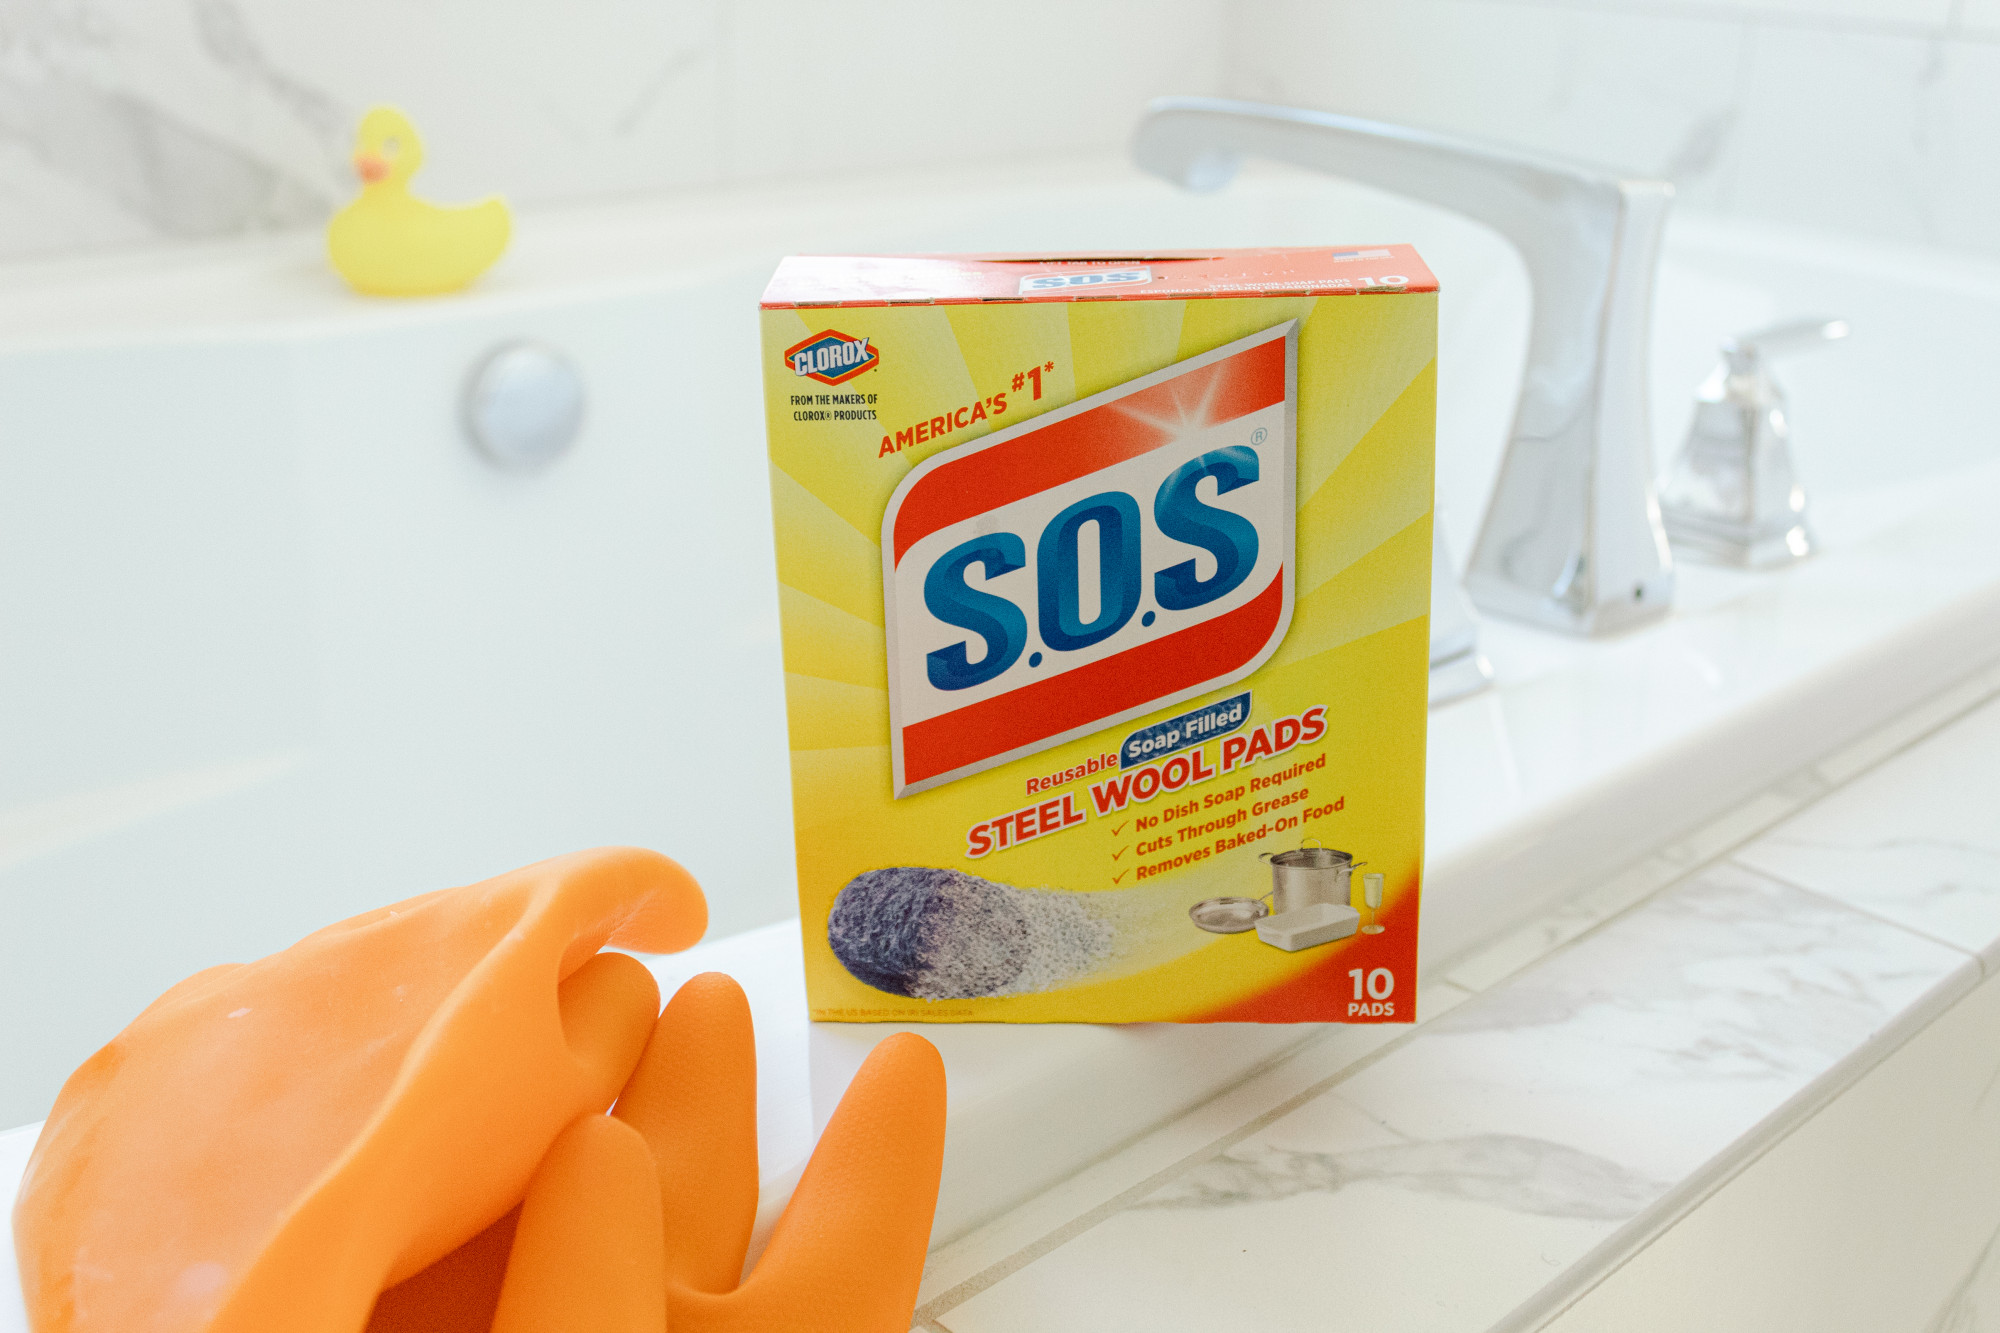 SOS cleaning pads